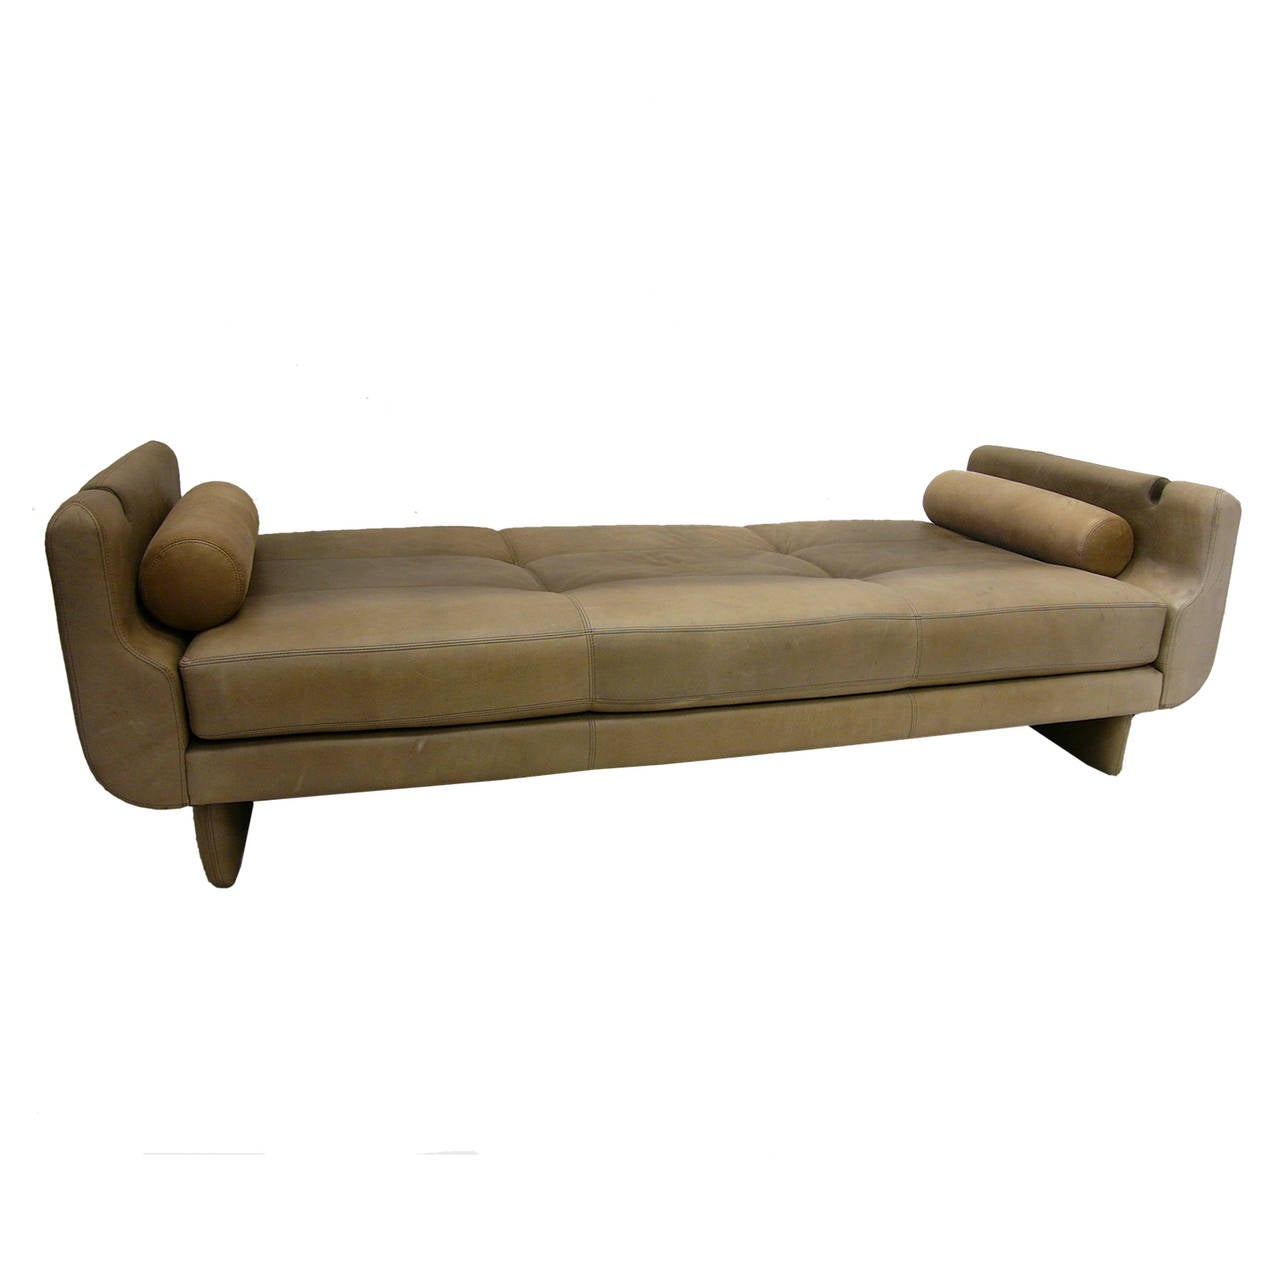 American Vladimir Kagan Matinee Sofa or Daybed in Brown Leather